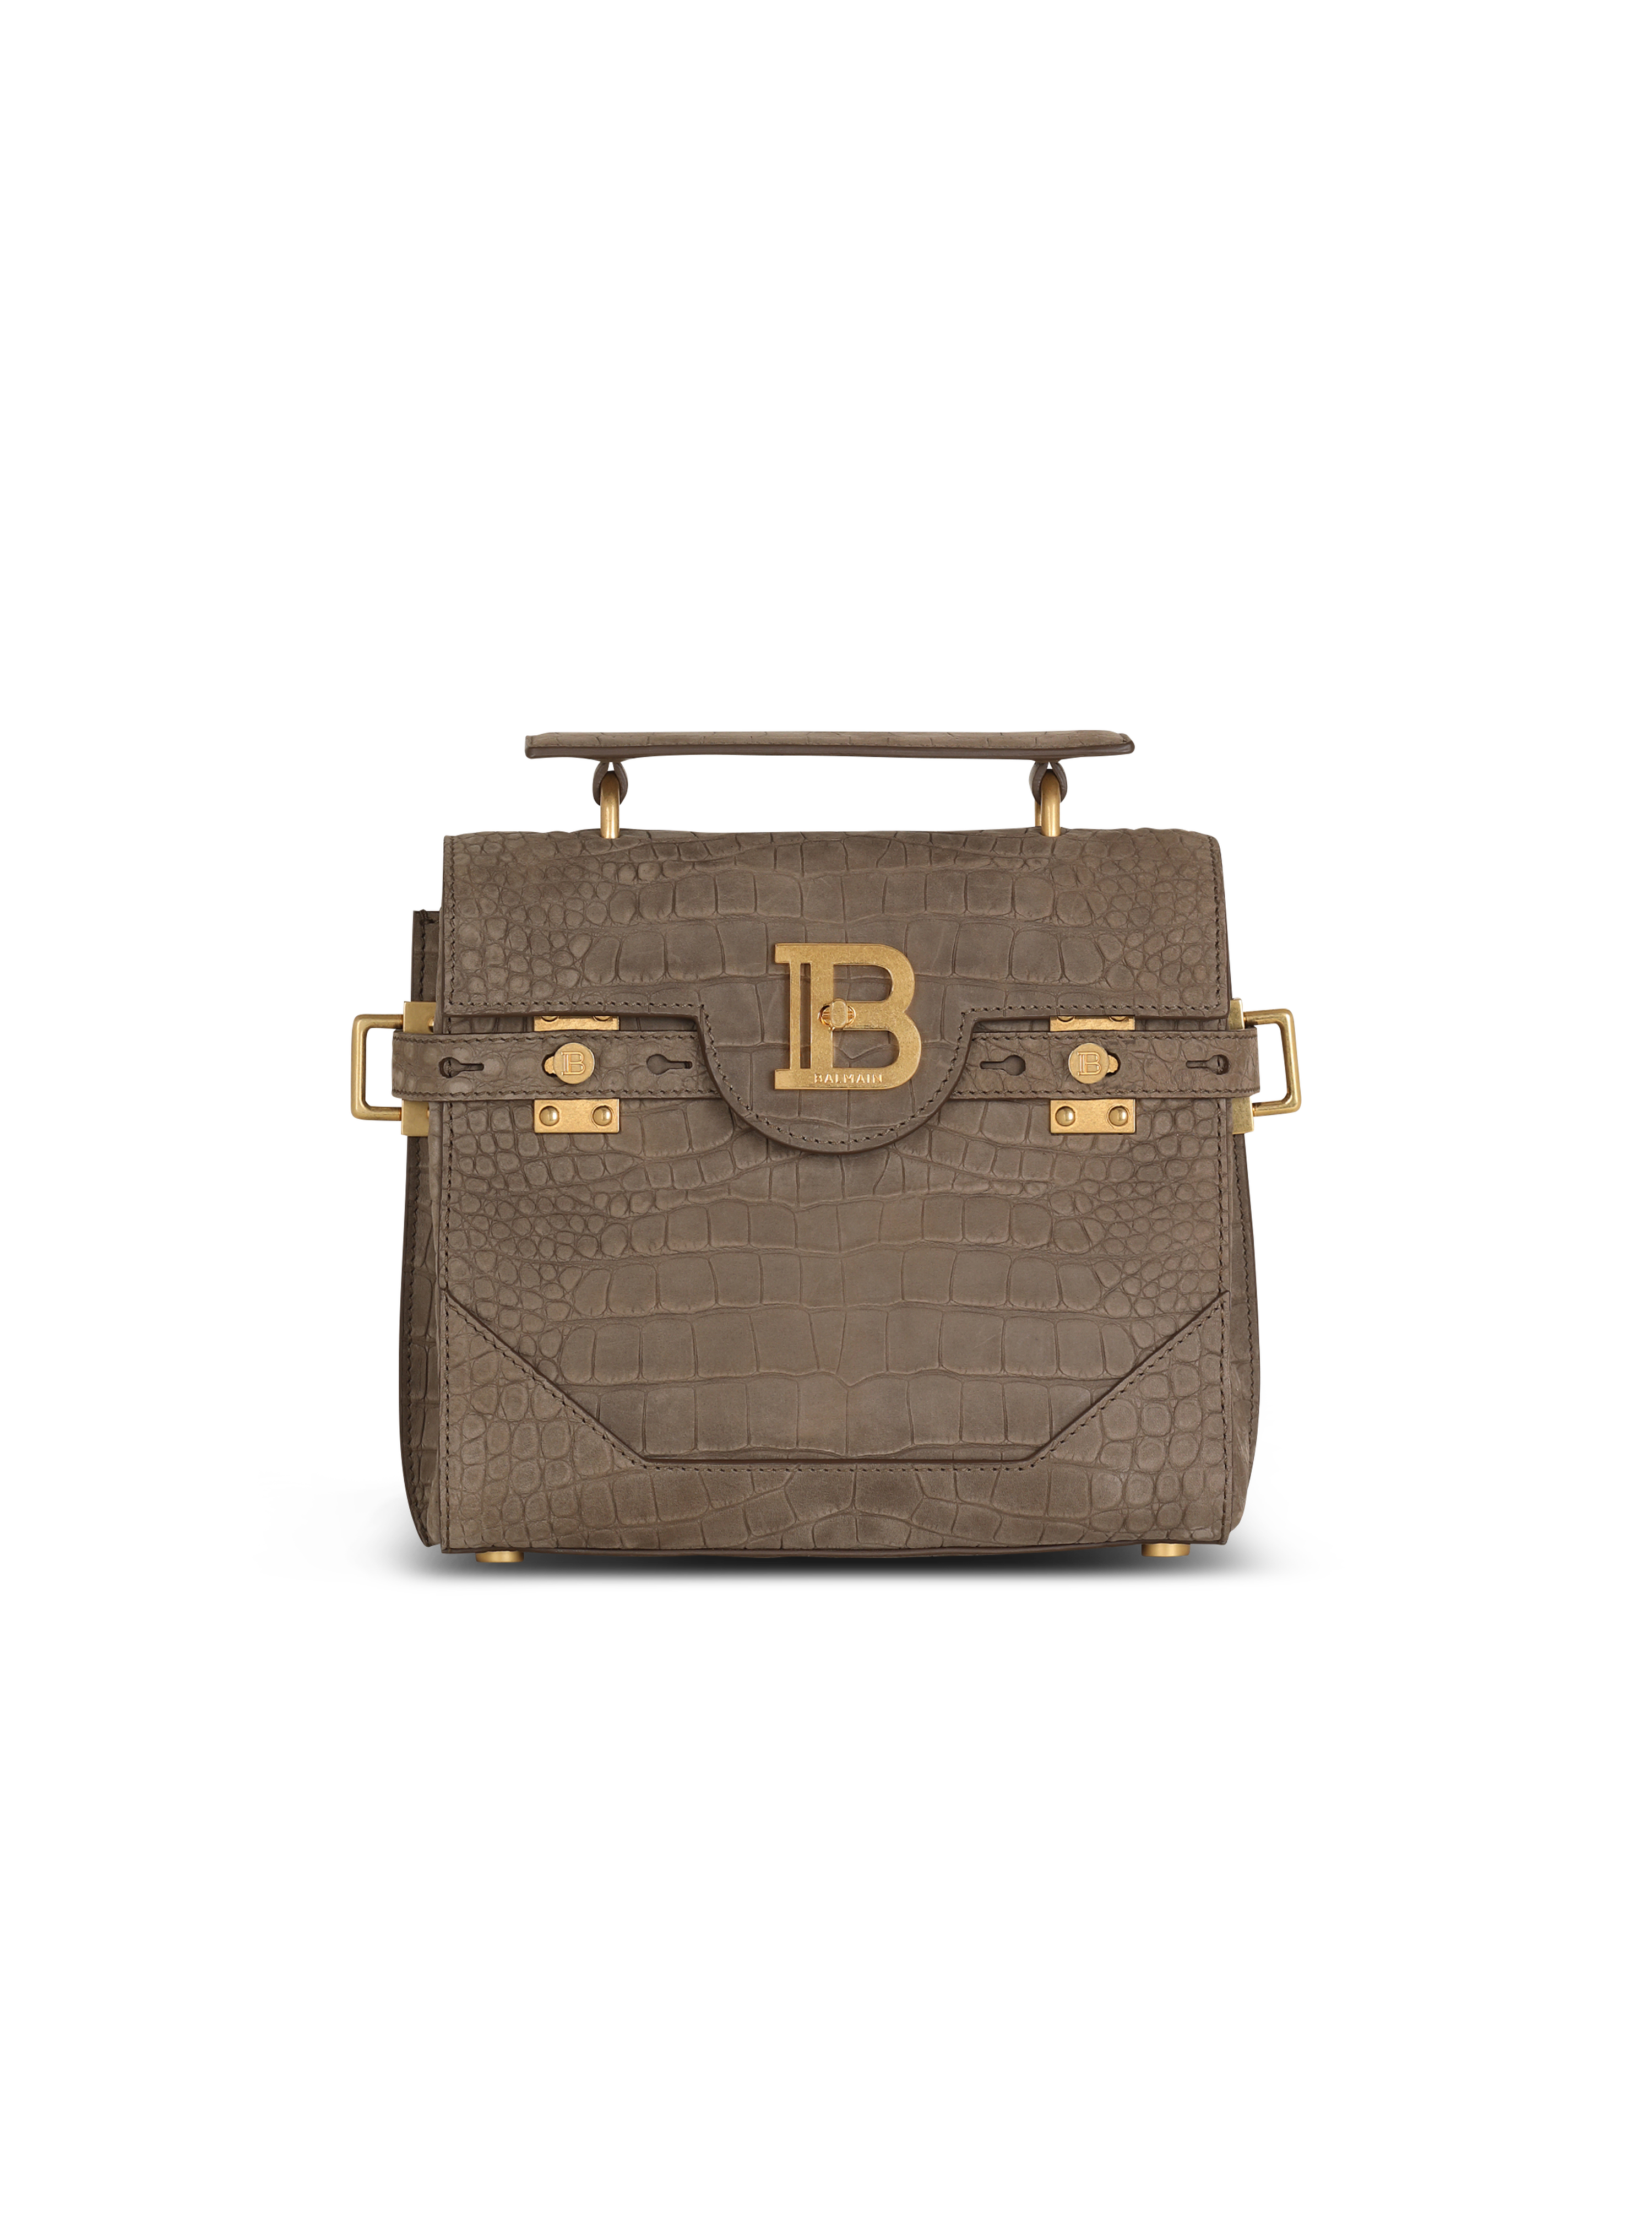 B-Buzz 23 bag in crocodile-embossed leather, grey